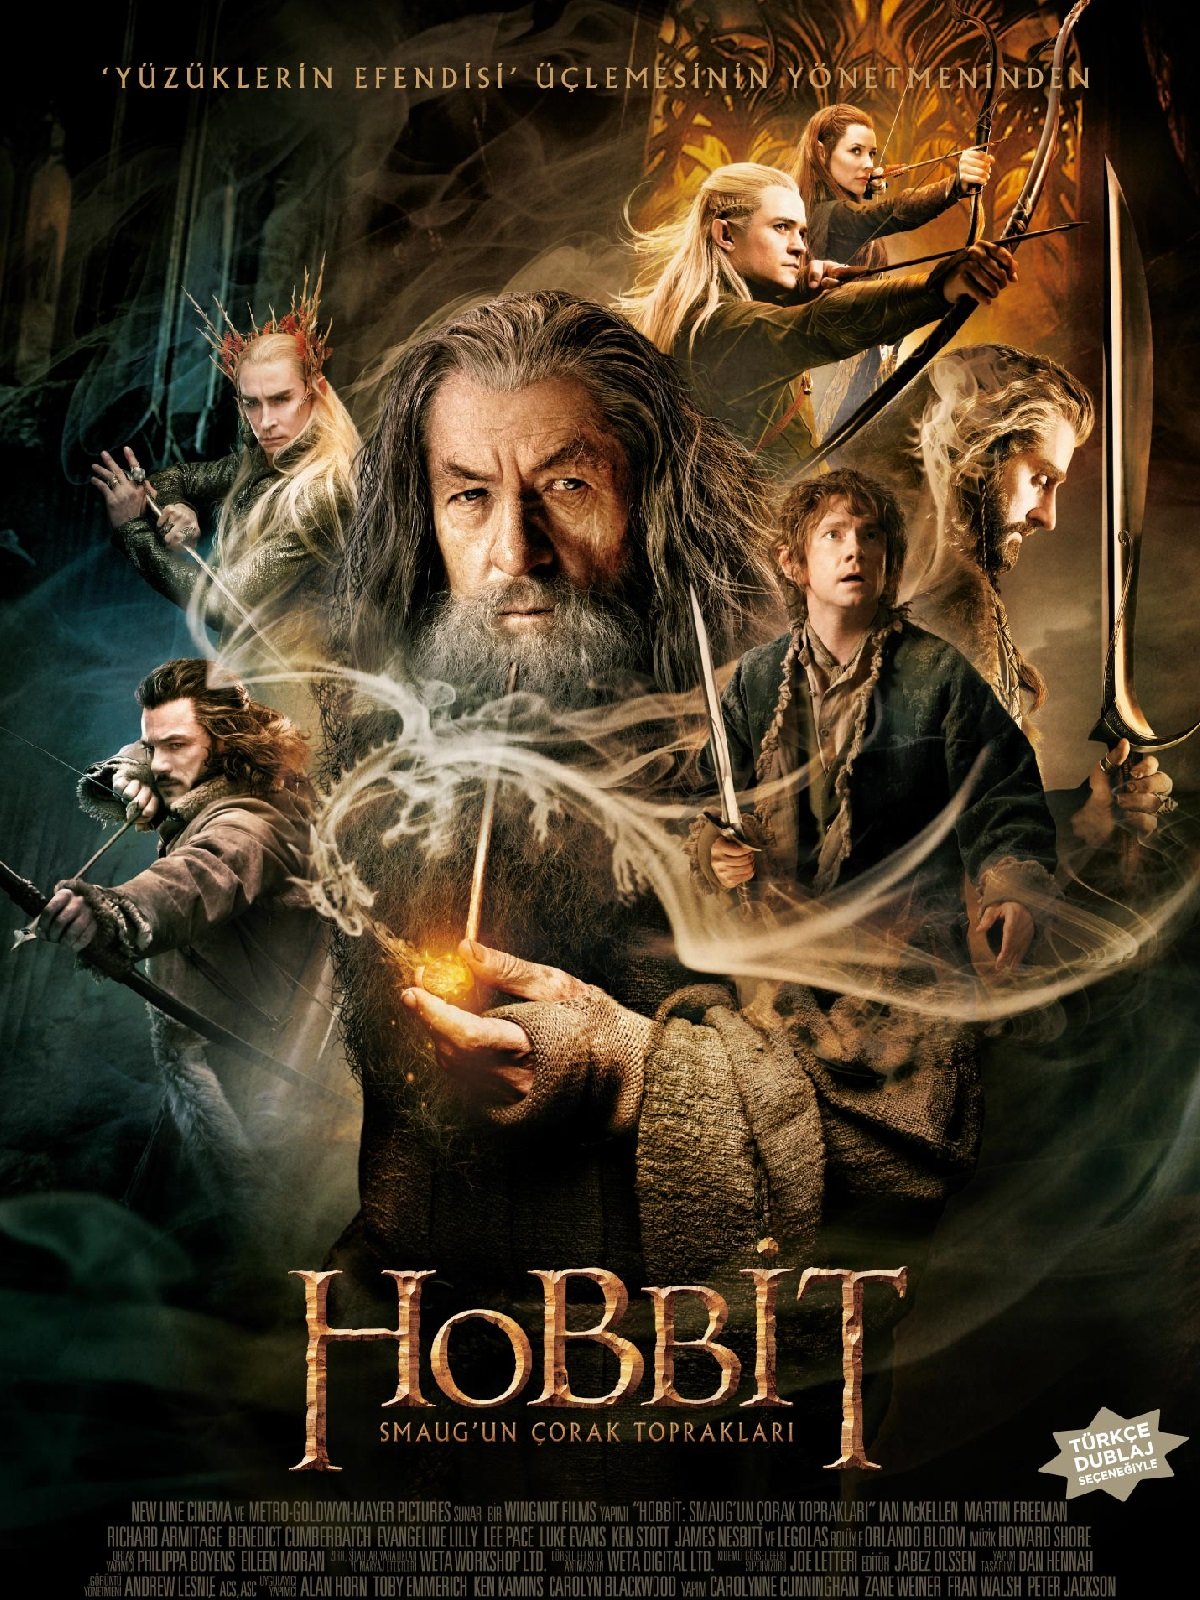 The Hobbit: The Desolation of Smaug (2013) Theatrical Cut 640Kbps 23.976Fps 48Khz 5.1Ch DD+ NF E-AC3 Turkish Audio TAC